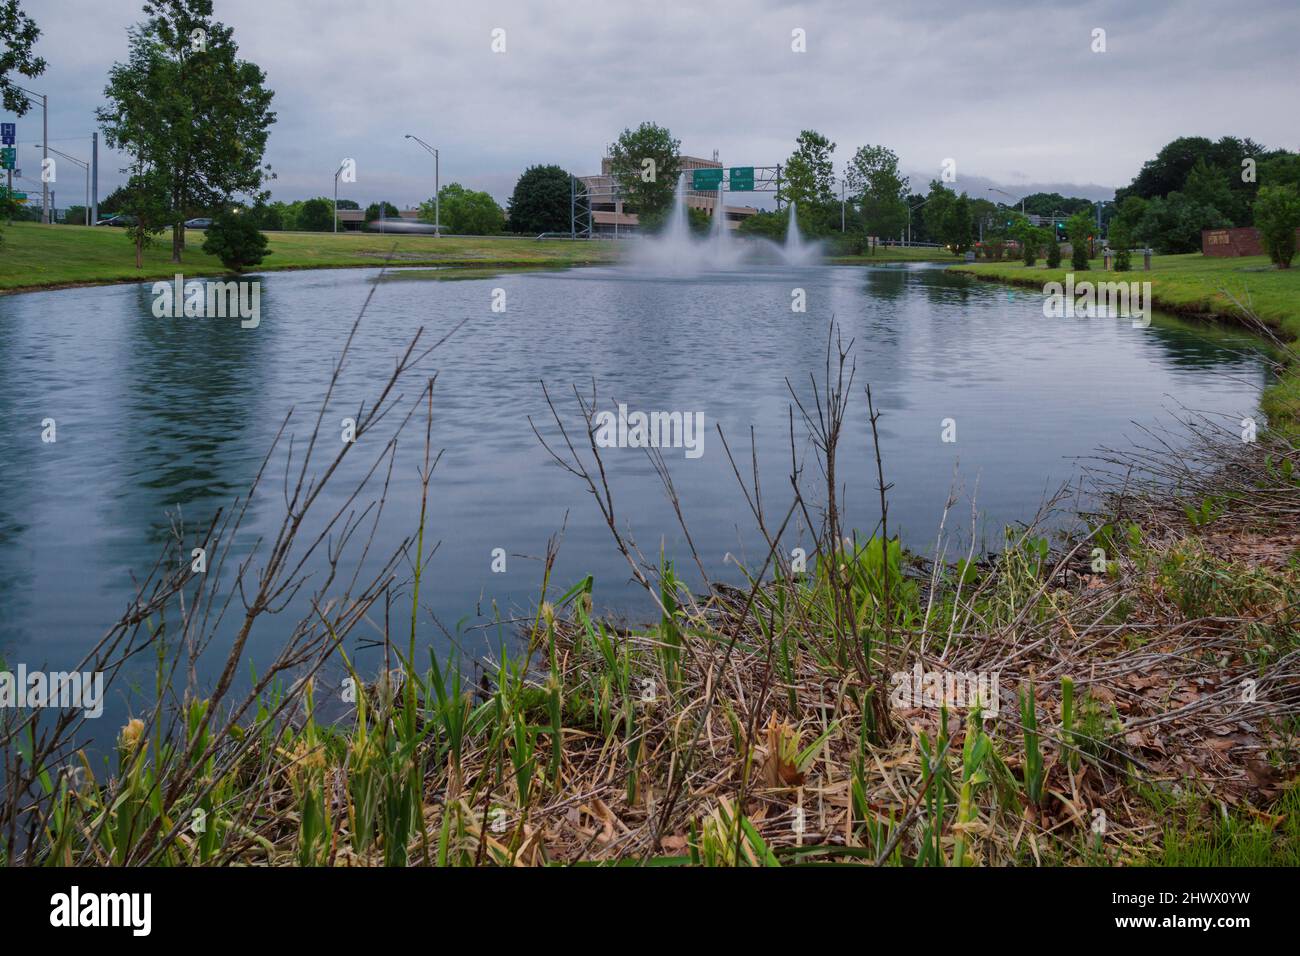 Landscape Evening View of a Pond at New Hartford Veteran Memorial. Stock Photo